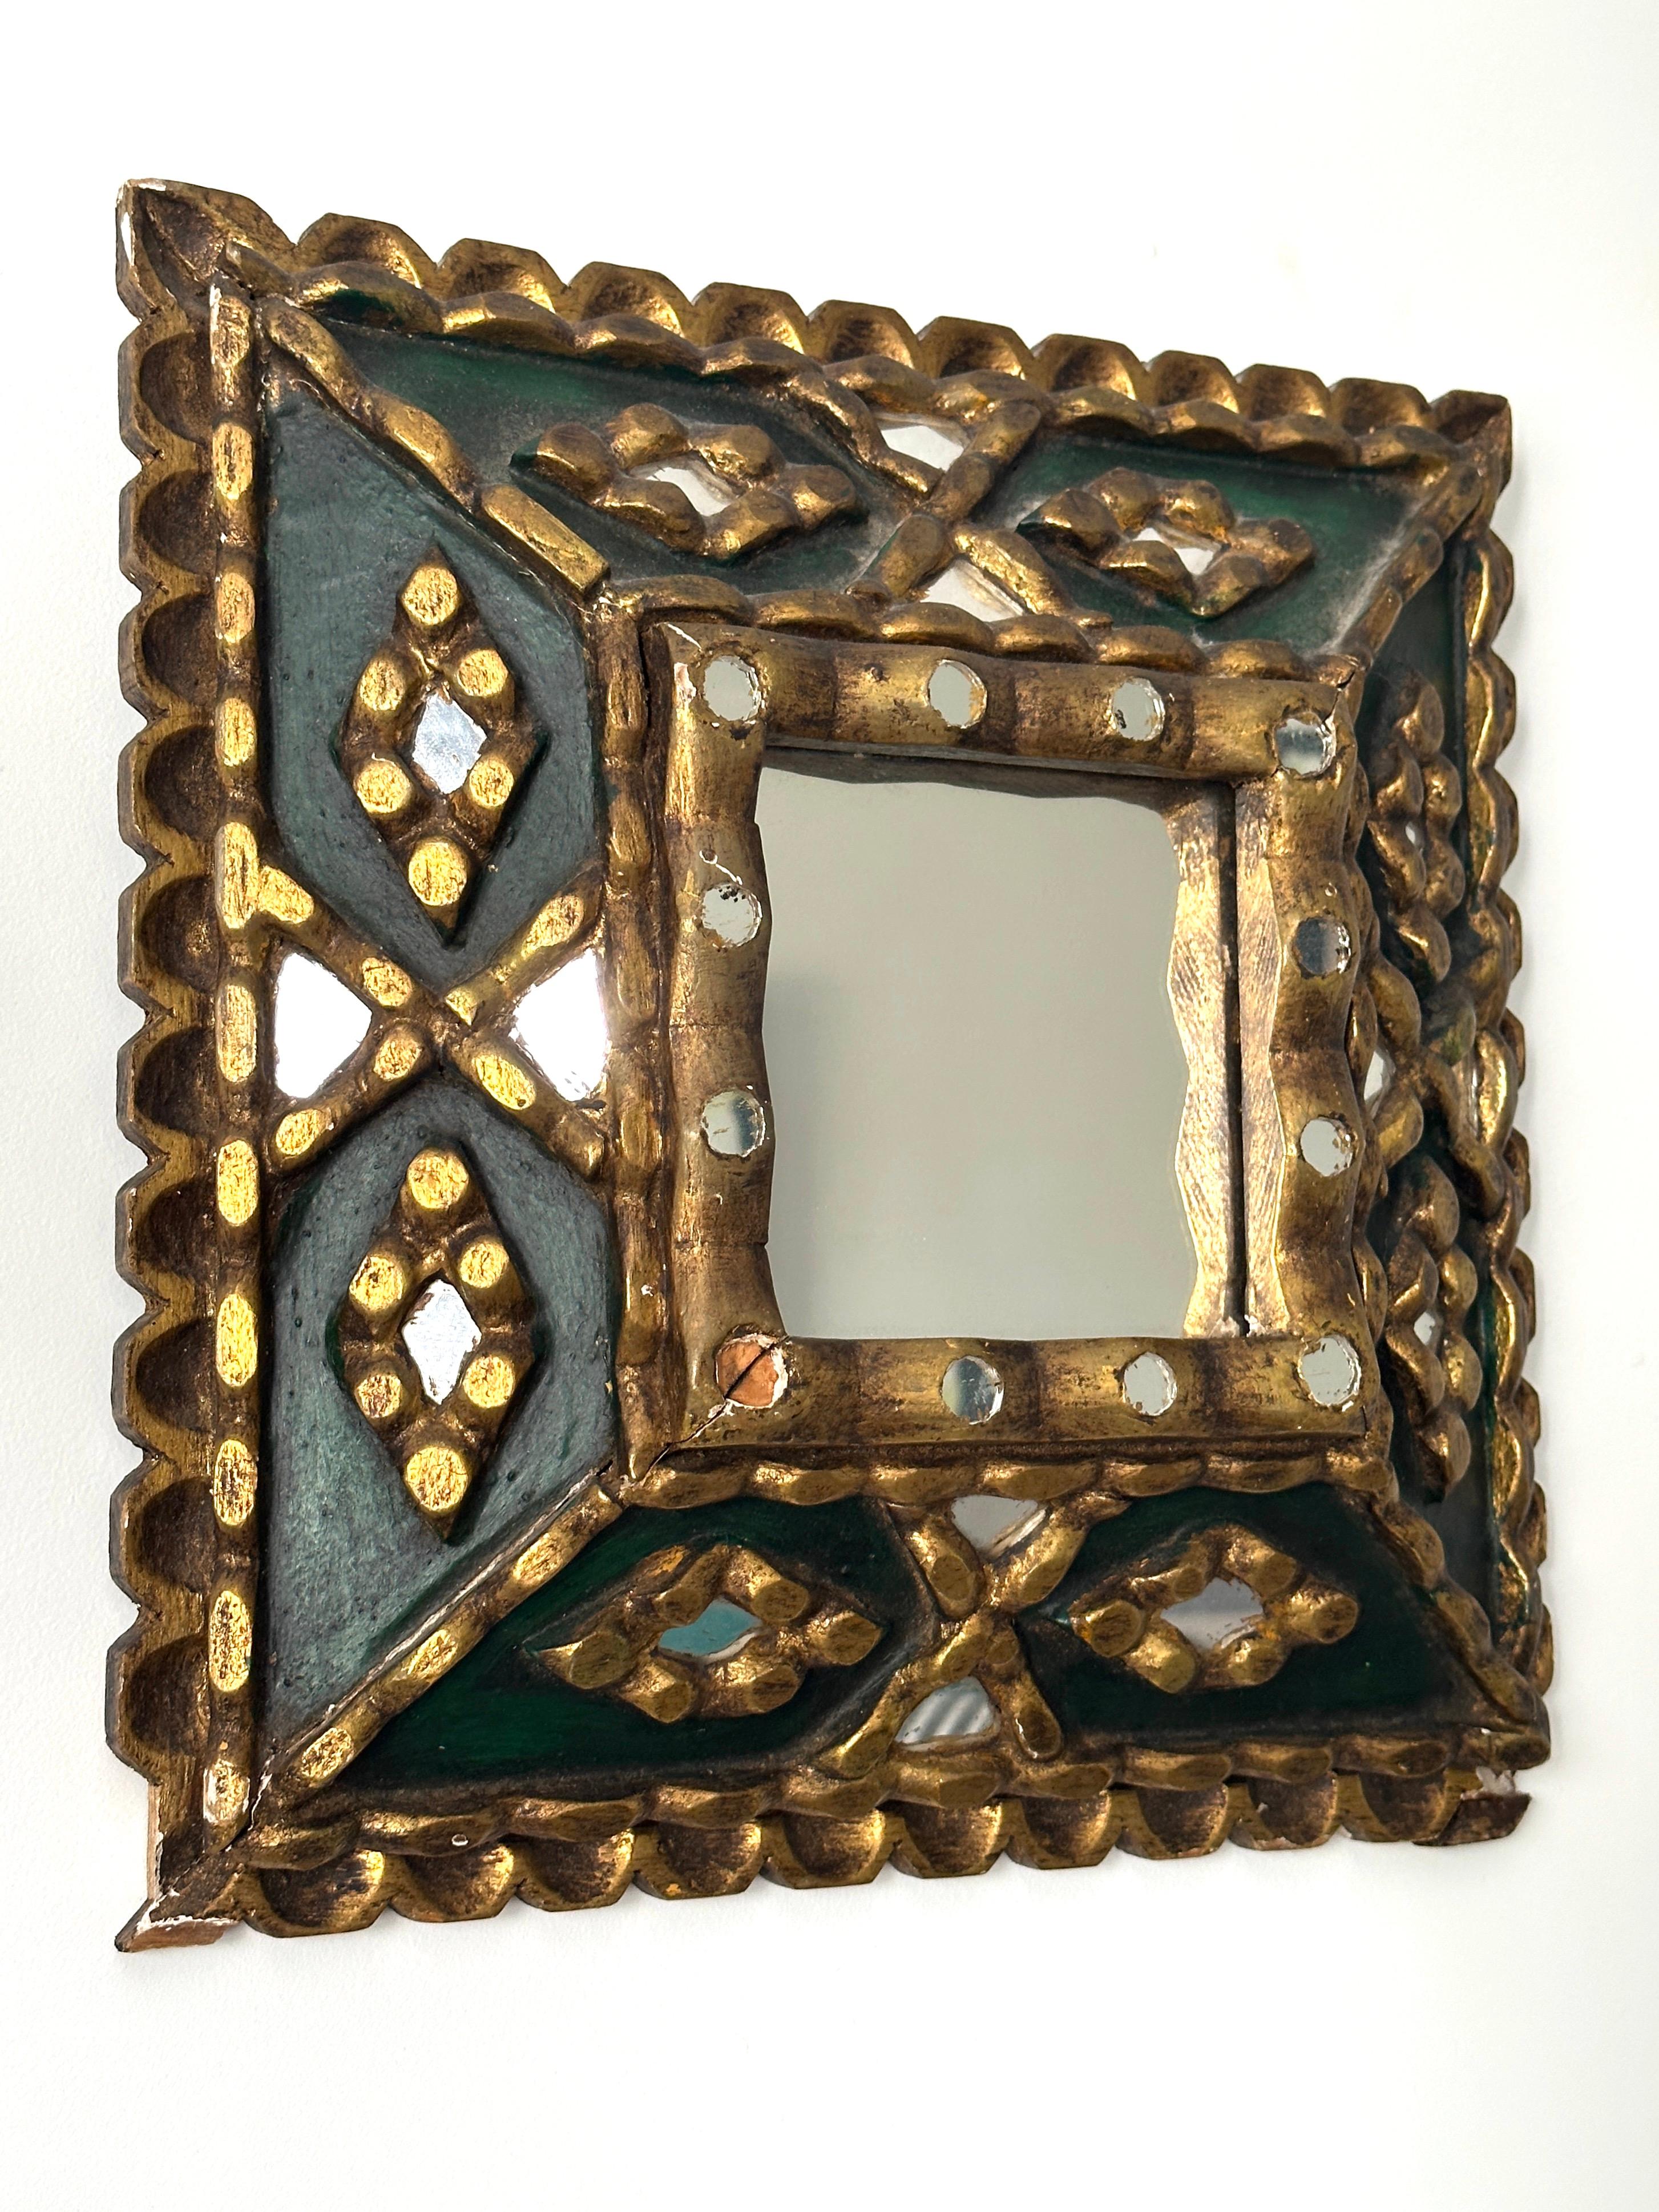 Spanish Colonial Spanish Folk Art Mirror with Mosaic Carved Gilt Wood Frame, c. 1930's For Sale